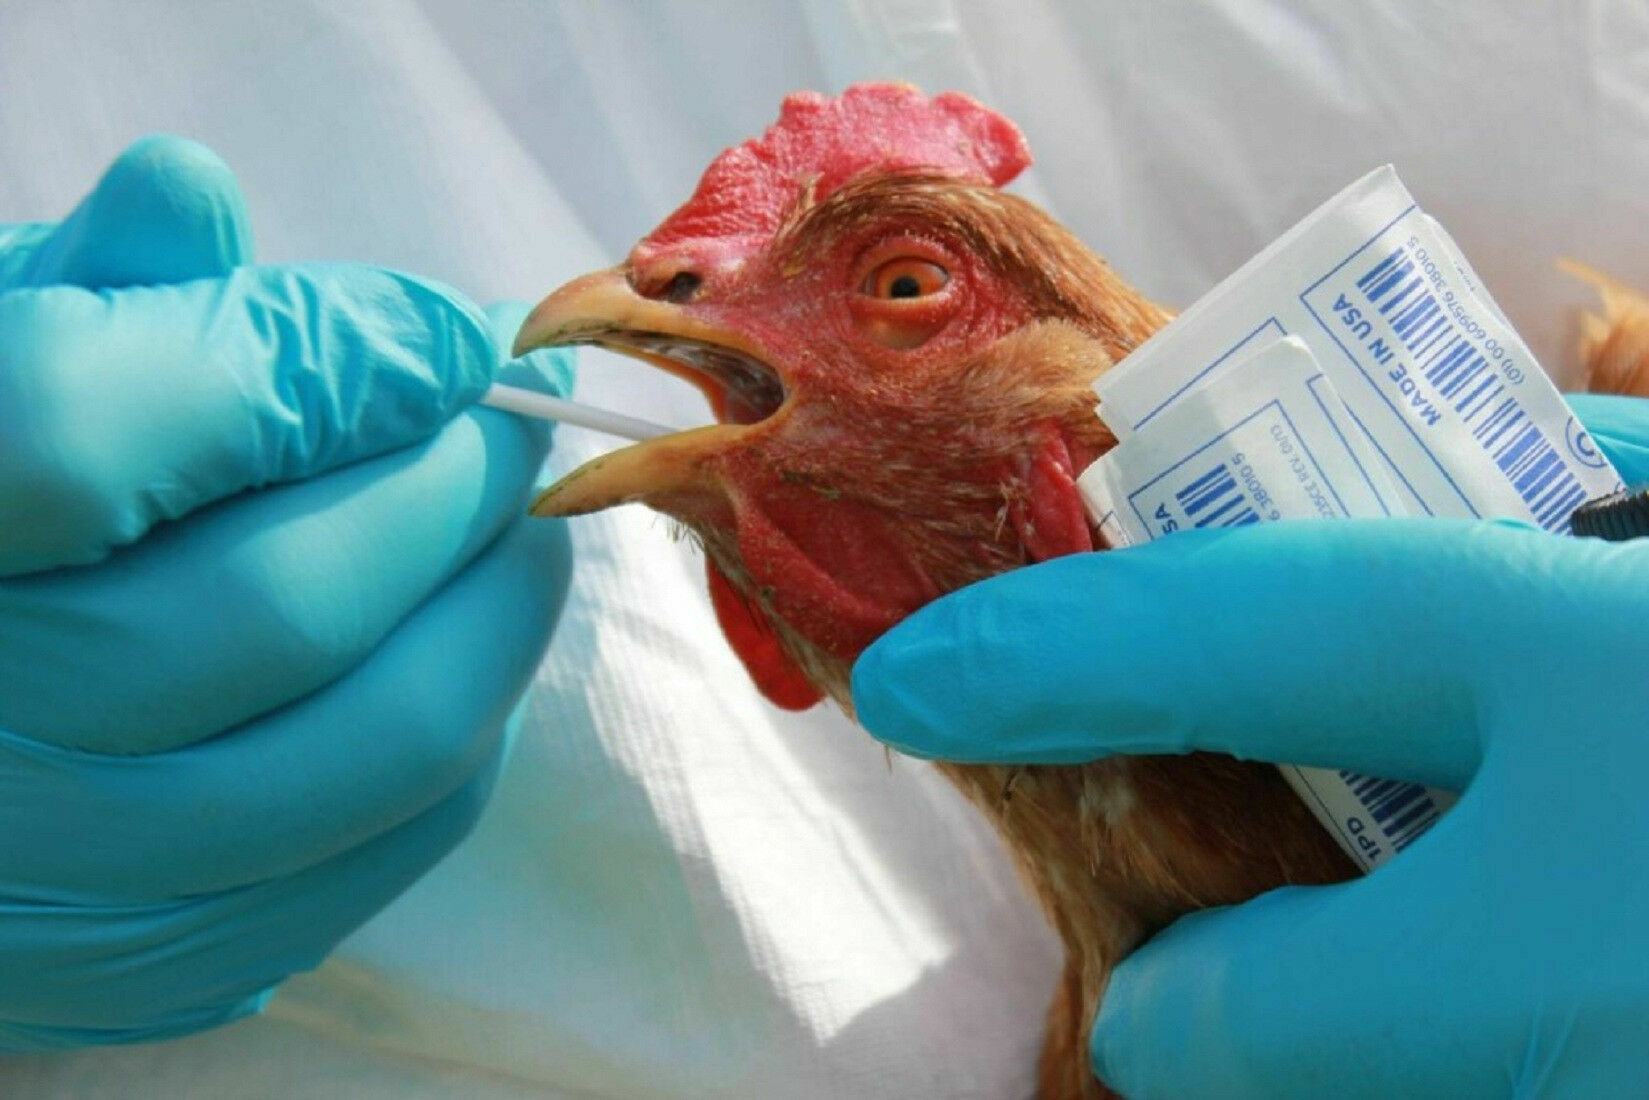 A new pandemic? In Russia, bird flu was first transmitted to humans